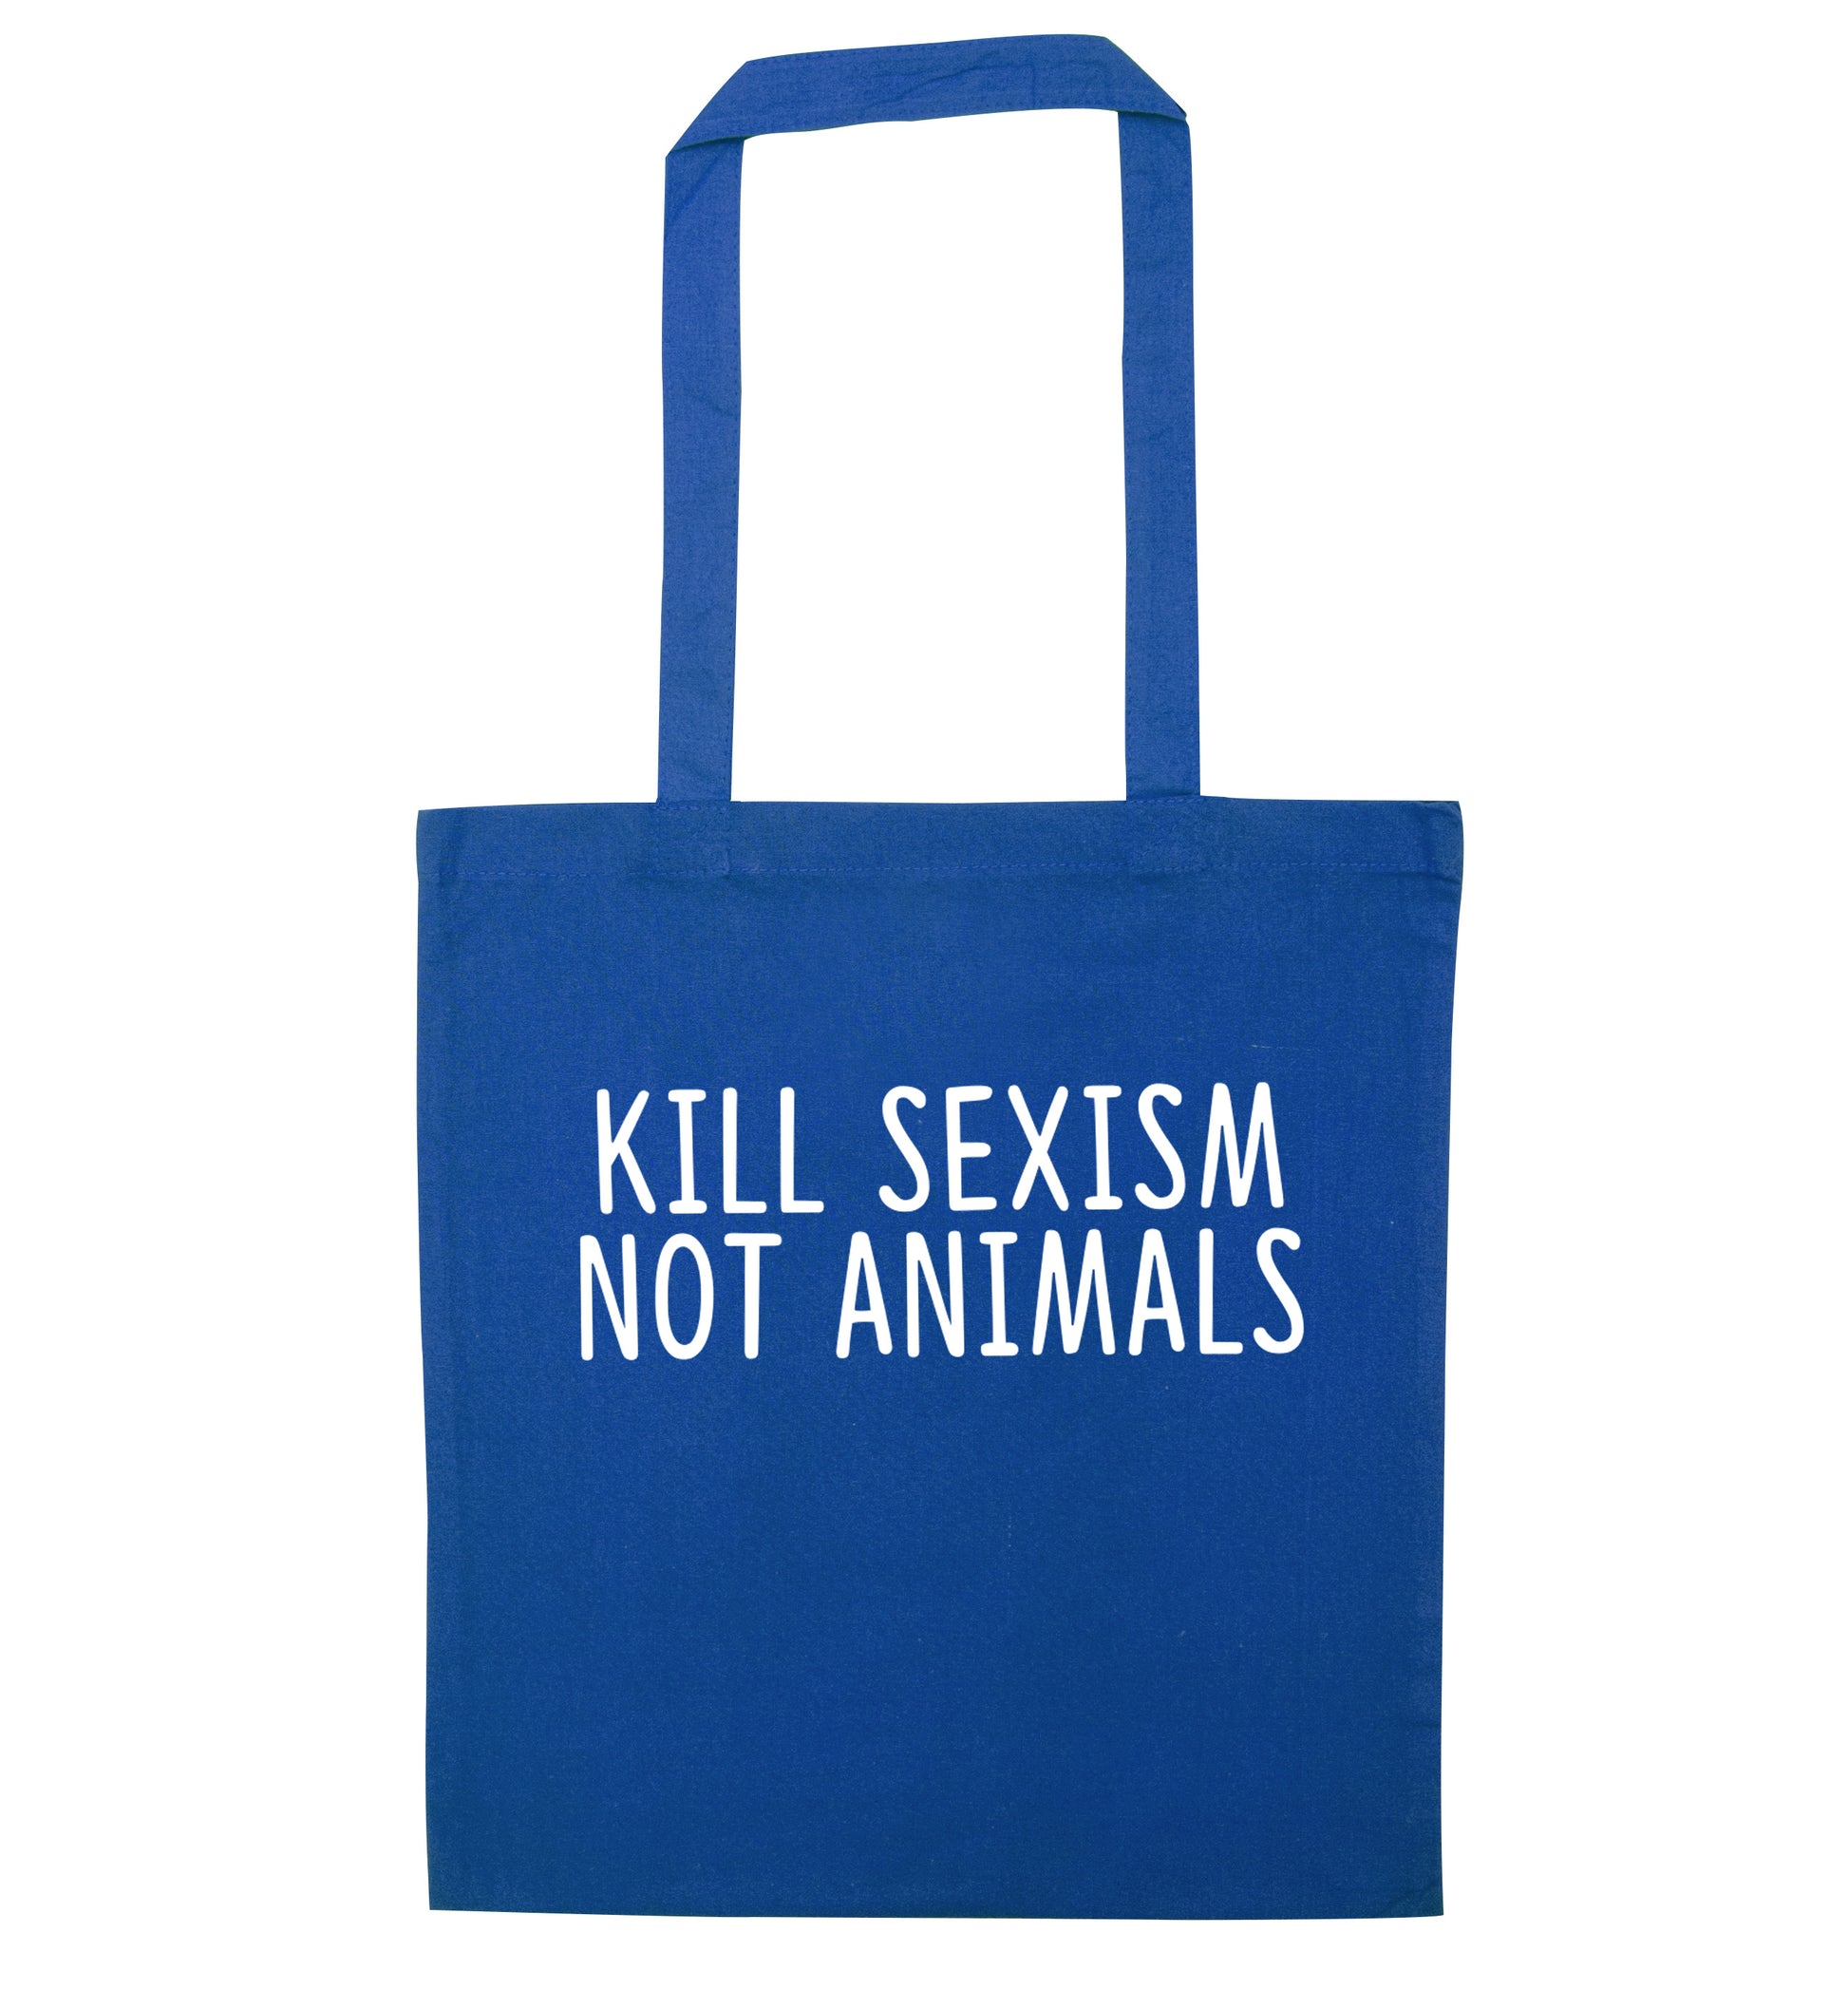 Kill Sexism Not Animals blue tote bag